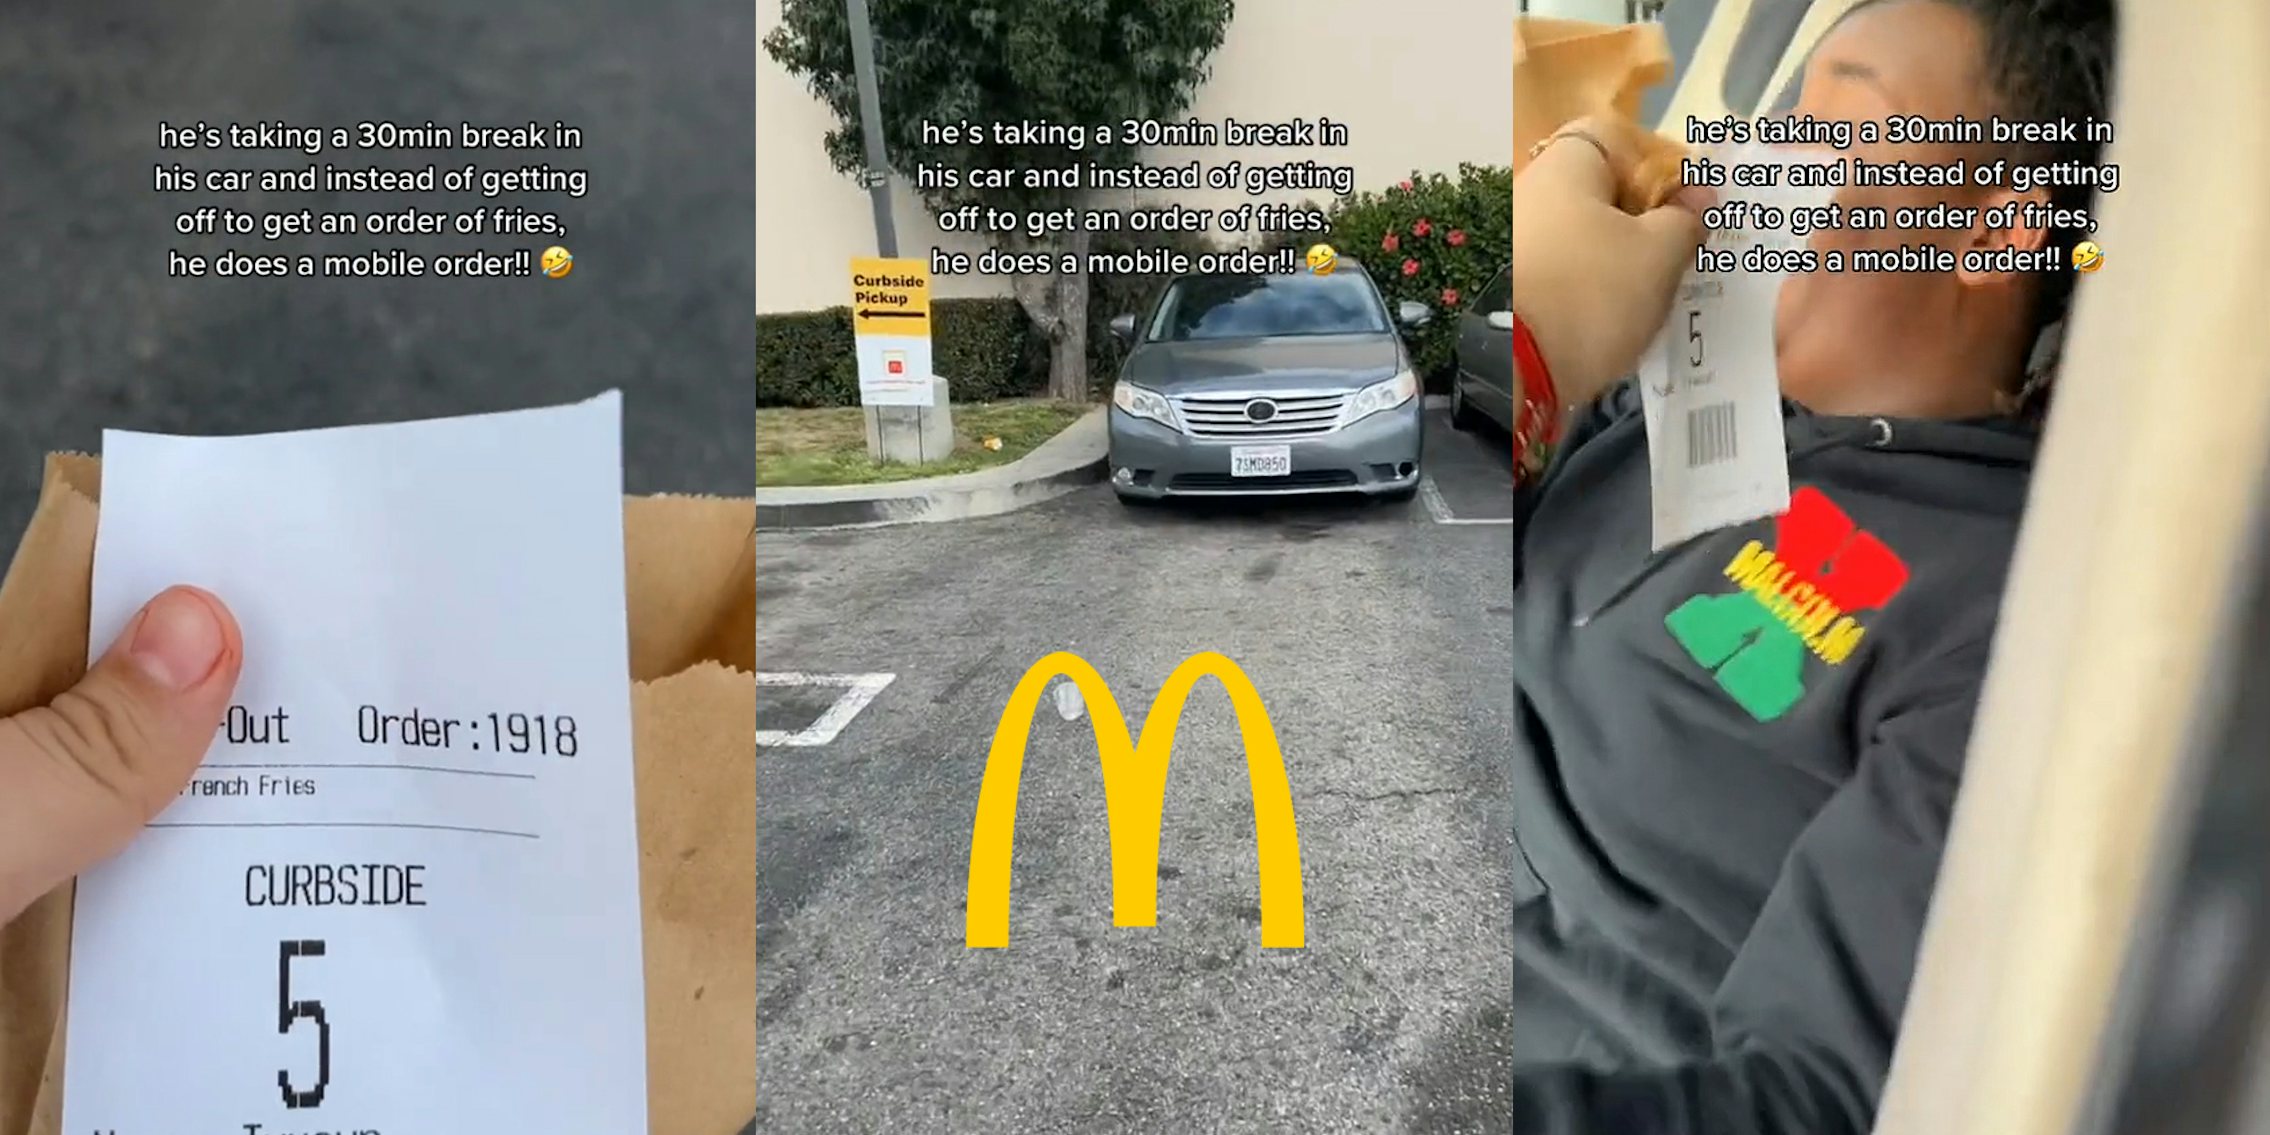 McDonald's worker holding mobile order outside caption 'he's taking a 30min break in his car and instead of getting off to get an order of fries, he does a mobile order!!' (l) McDonald's worker on break in car outside caption 'he's taking a 30min break in his car and instead of getting off to get an order of fries, he does a mobile order!!' with McDonald's logo centered at bottom (c) McDonald's worker holding mobile up to other worker's face in car caption 'he's taking a 30min break in his car and instead of getting off to get an order of fries, he does a mobile order!!' (r)